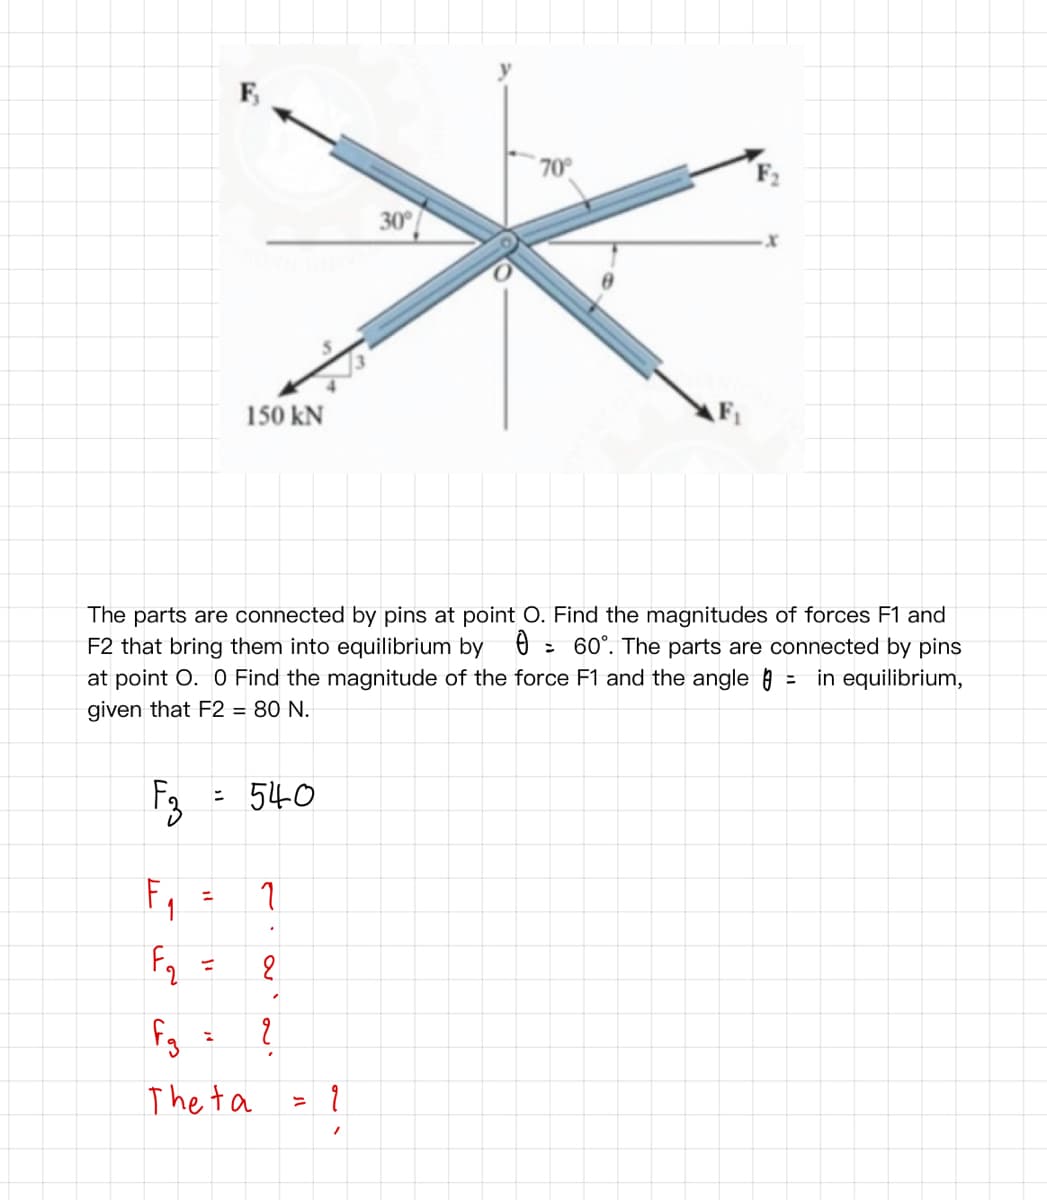 F,
70°
30
150 kN
F1
The parts are connected by pins at point O. Find the magnitudes of forces F1 and
F2 that bring them into equilibrium by 0 : 60°. The parts are connected by pins
at point O. O Find the magnitude of the force F1 and the angle = in equilibrium,
given that F2 = 80 N.
F3
540
ニ
%3D
Fq
The ta
ニ
